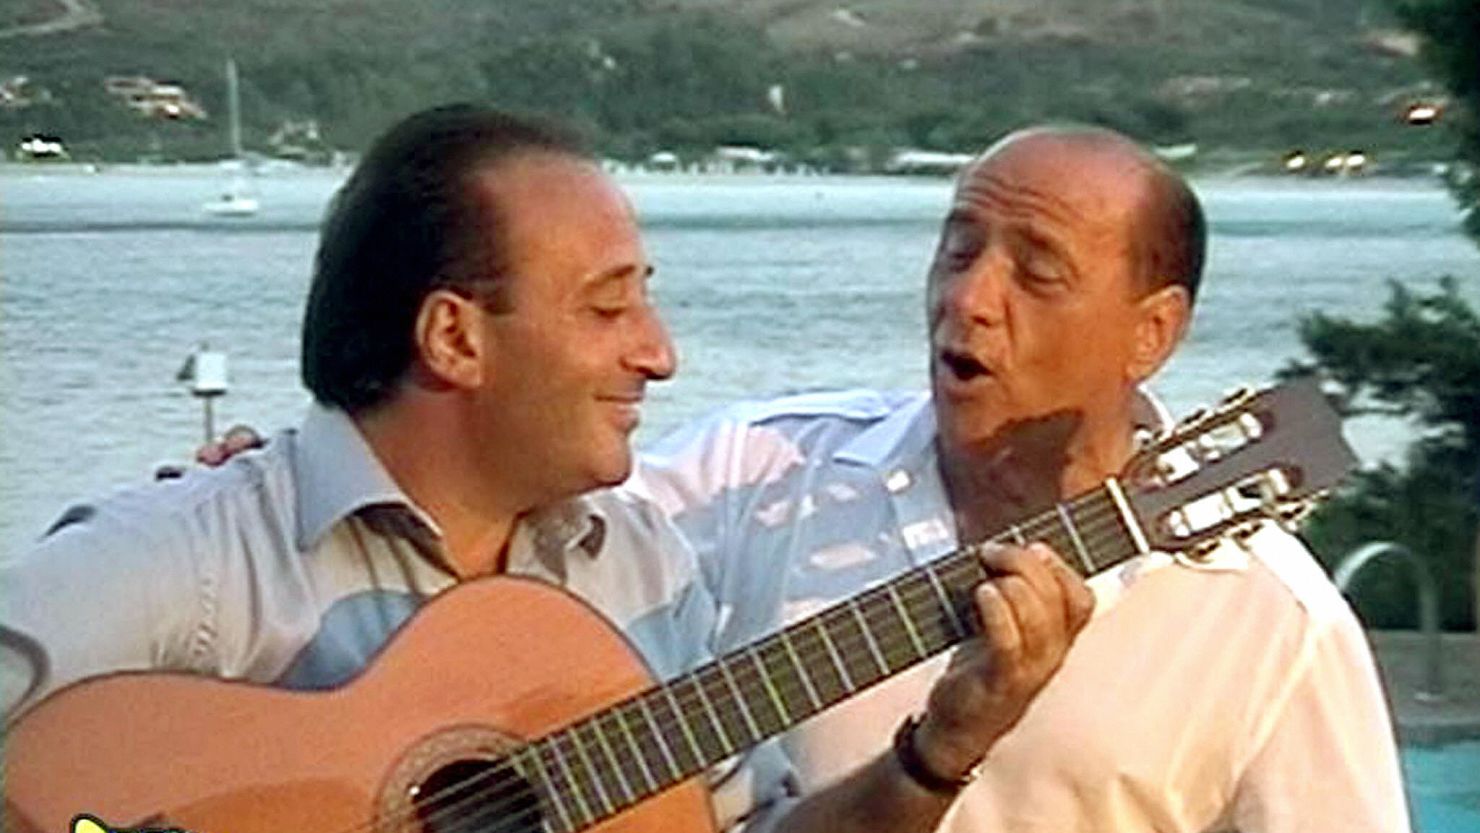 Flamboyant former Italian Prime Minister Silvio Berlusconi sings with guitarist Mariano Apicella during a private party in 2003.